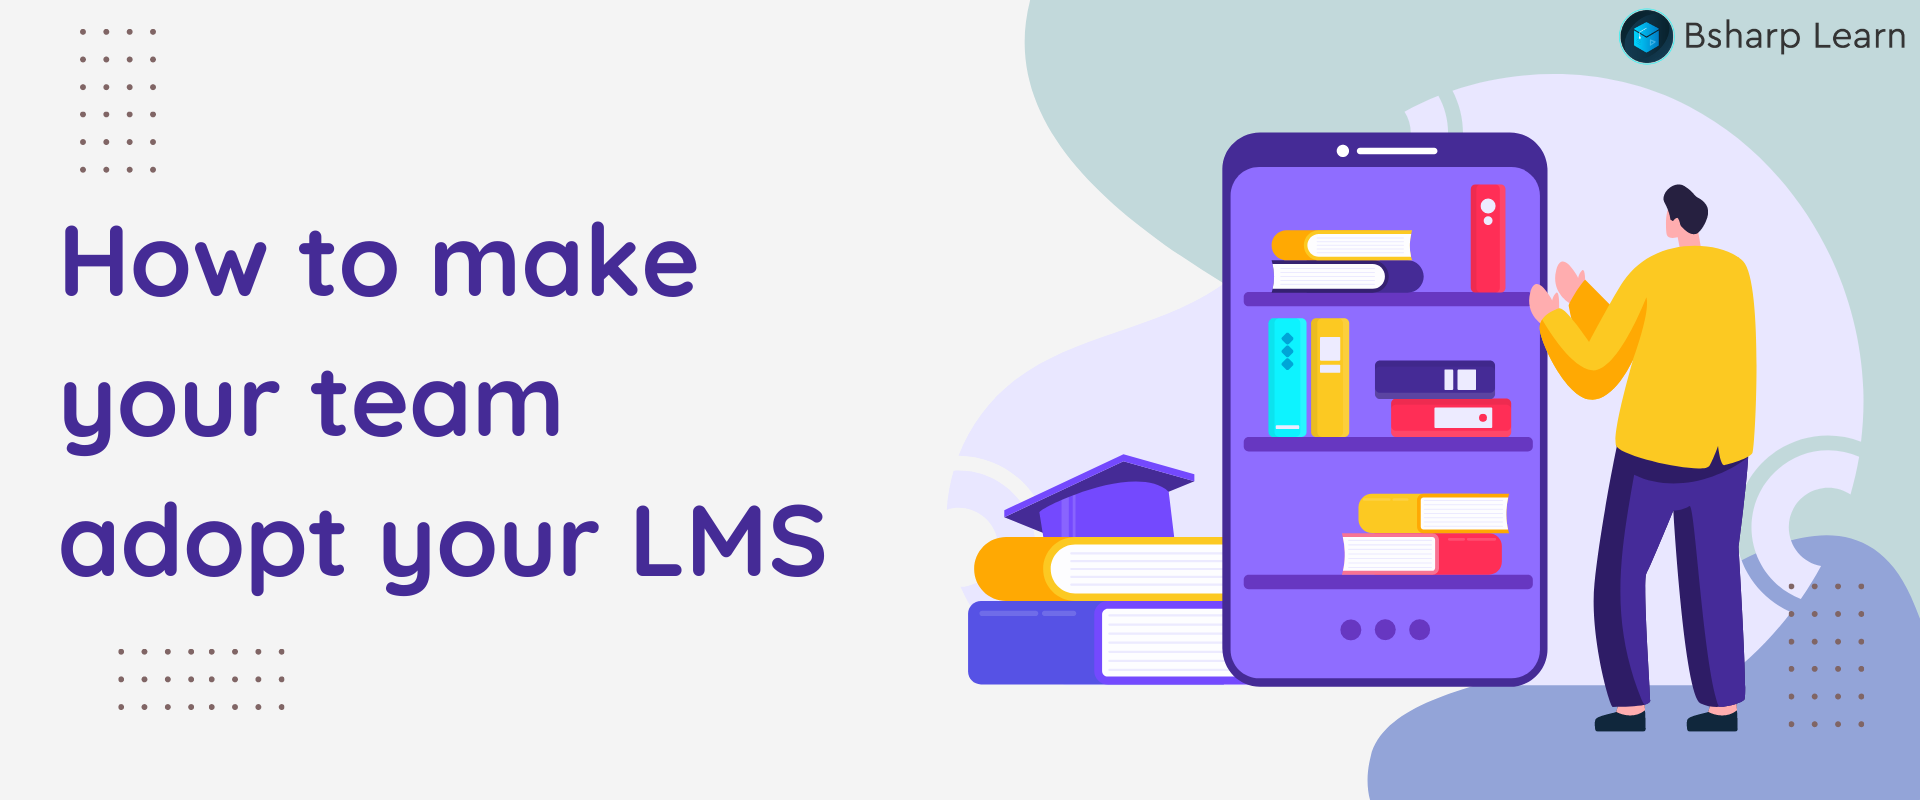 How to make your team adopt your LMS